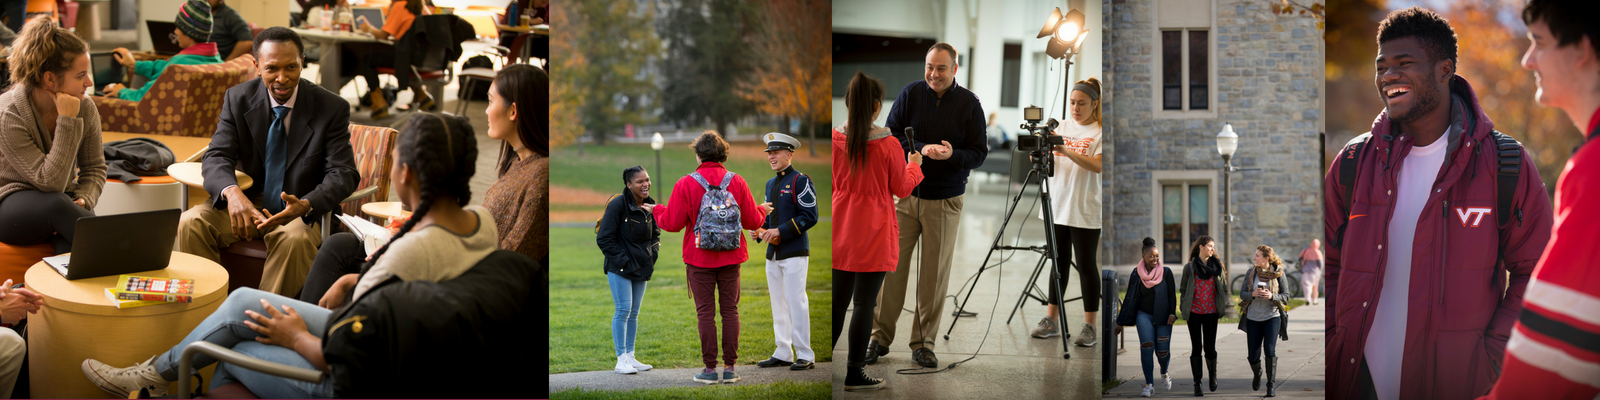 5 photo collage showing students interacting with each other and faculty around campus